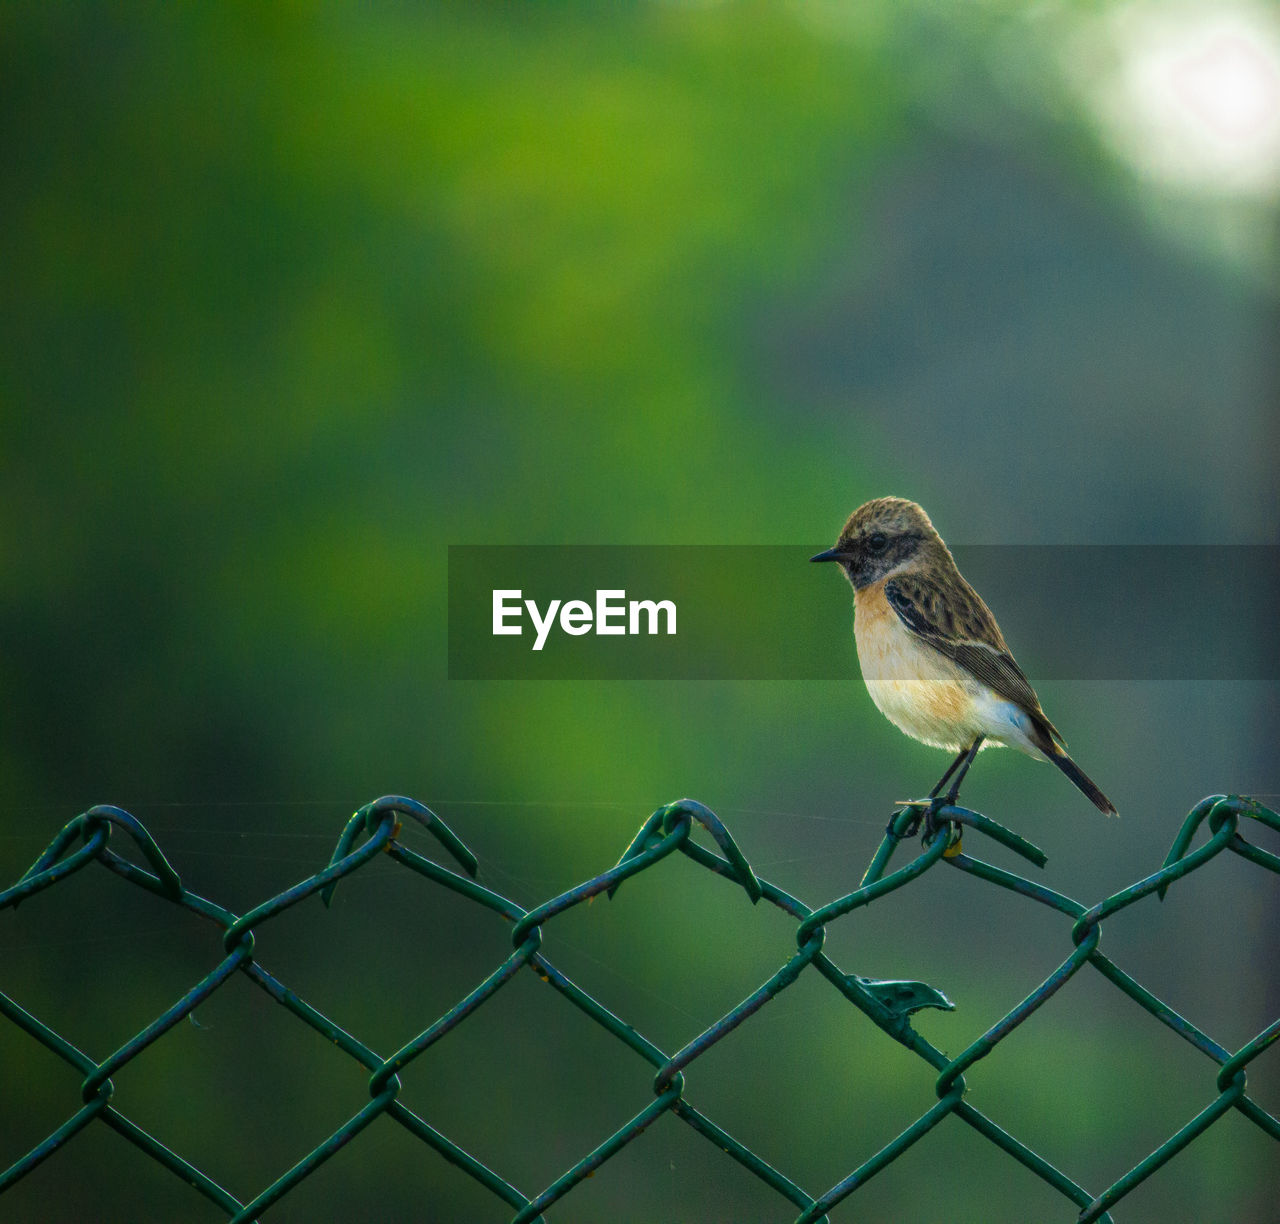 CLOSE-UP OF BIRD PERCHING ON FENCE AGAINST BLURRED BACKGROUND